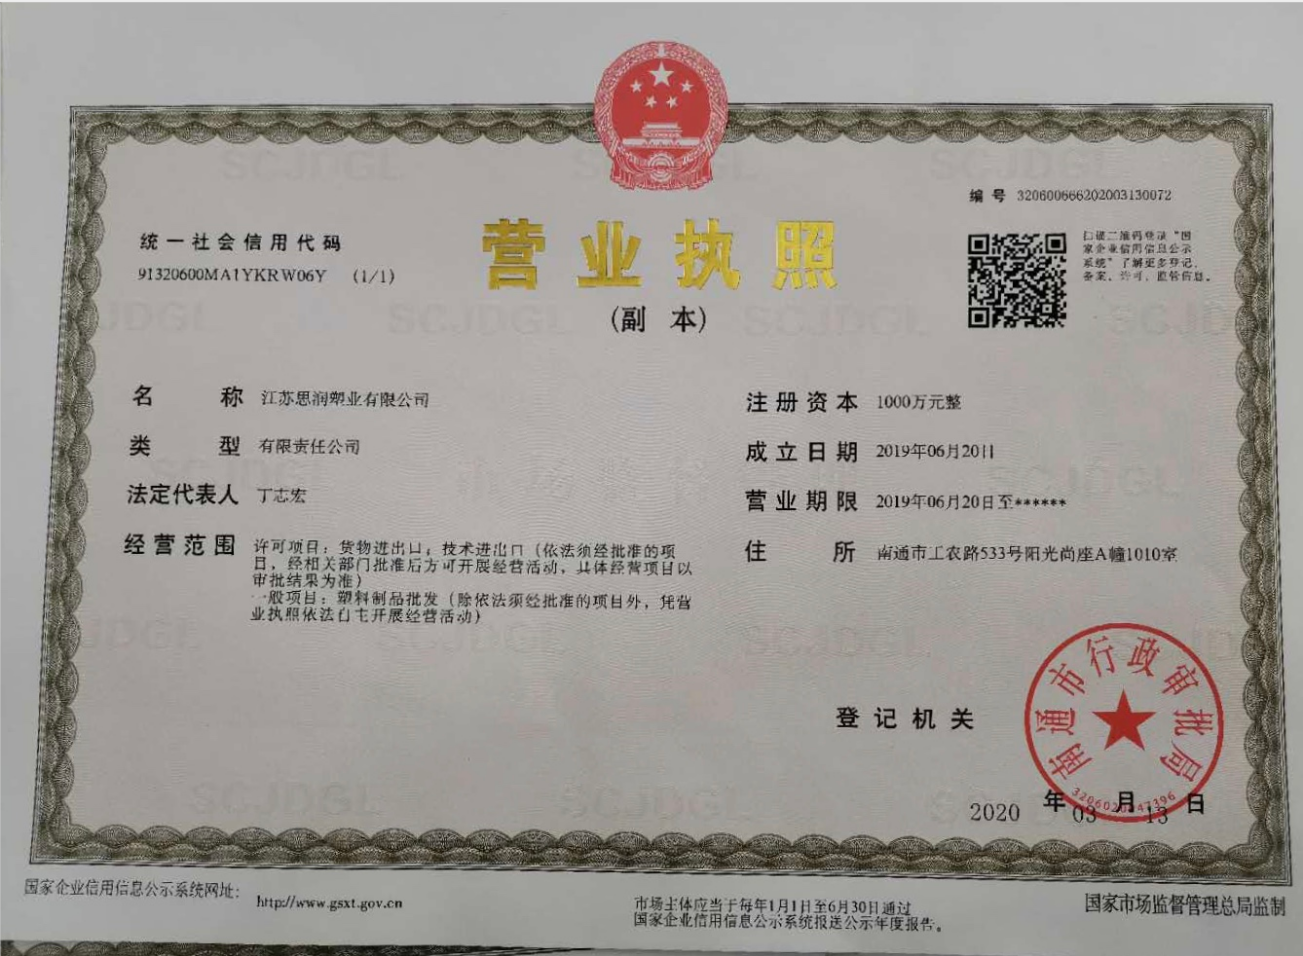 The Business License